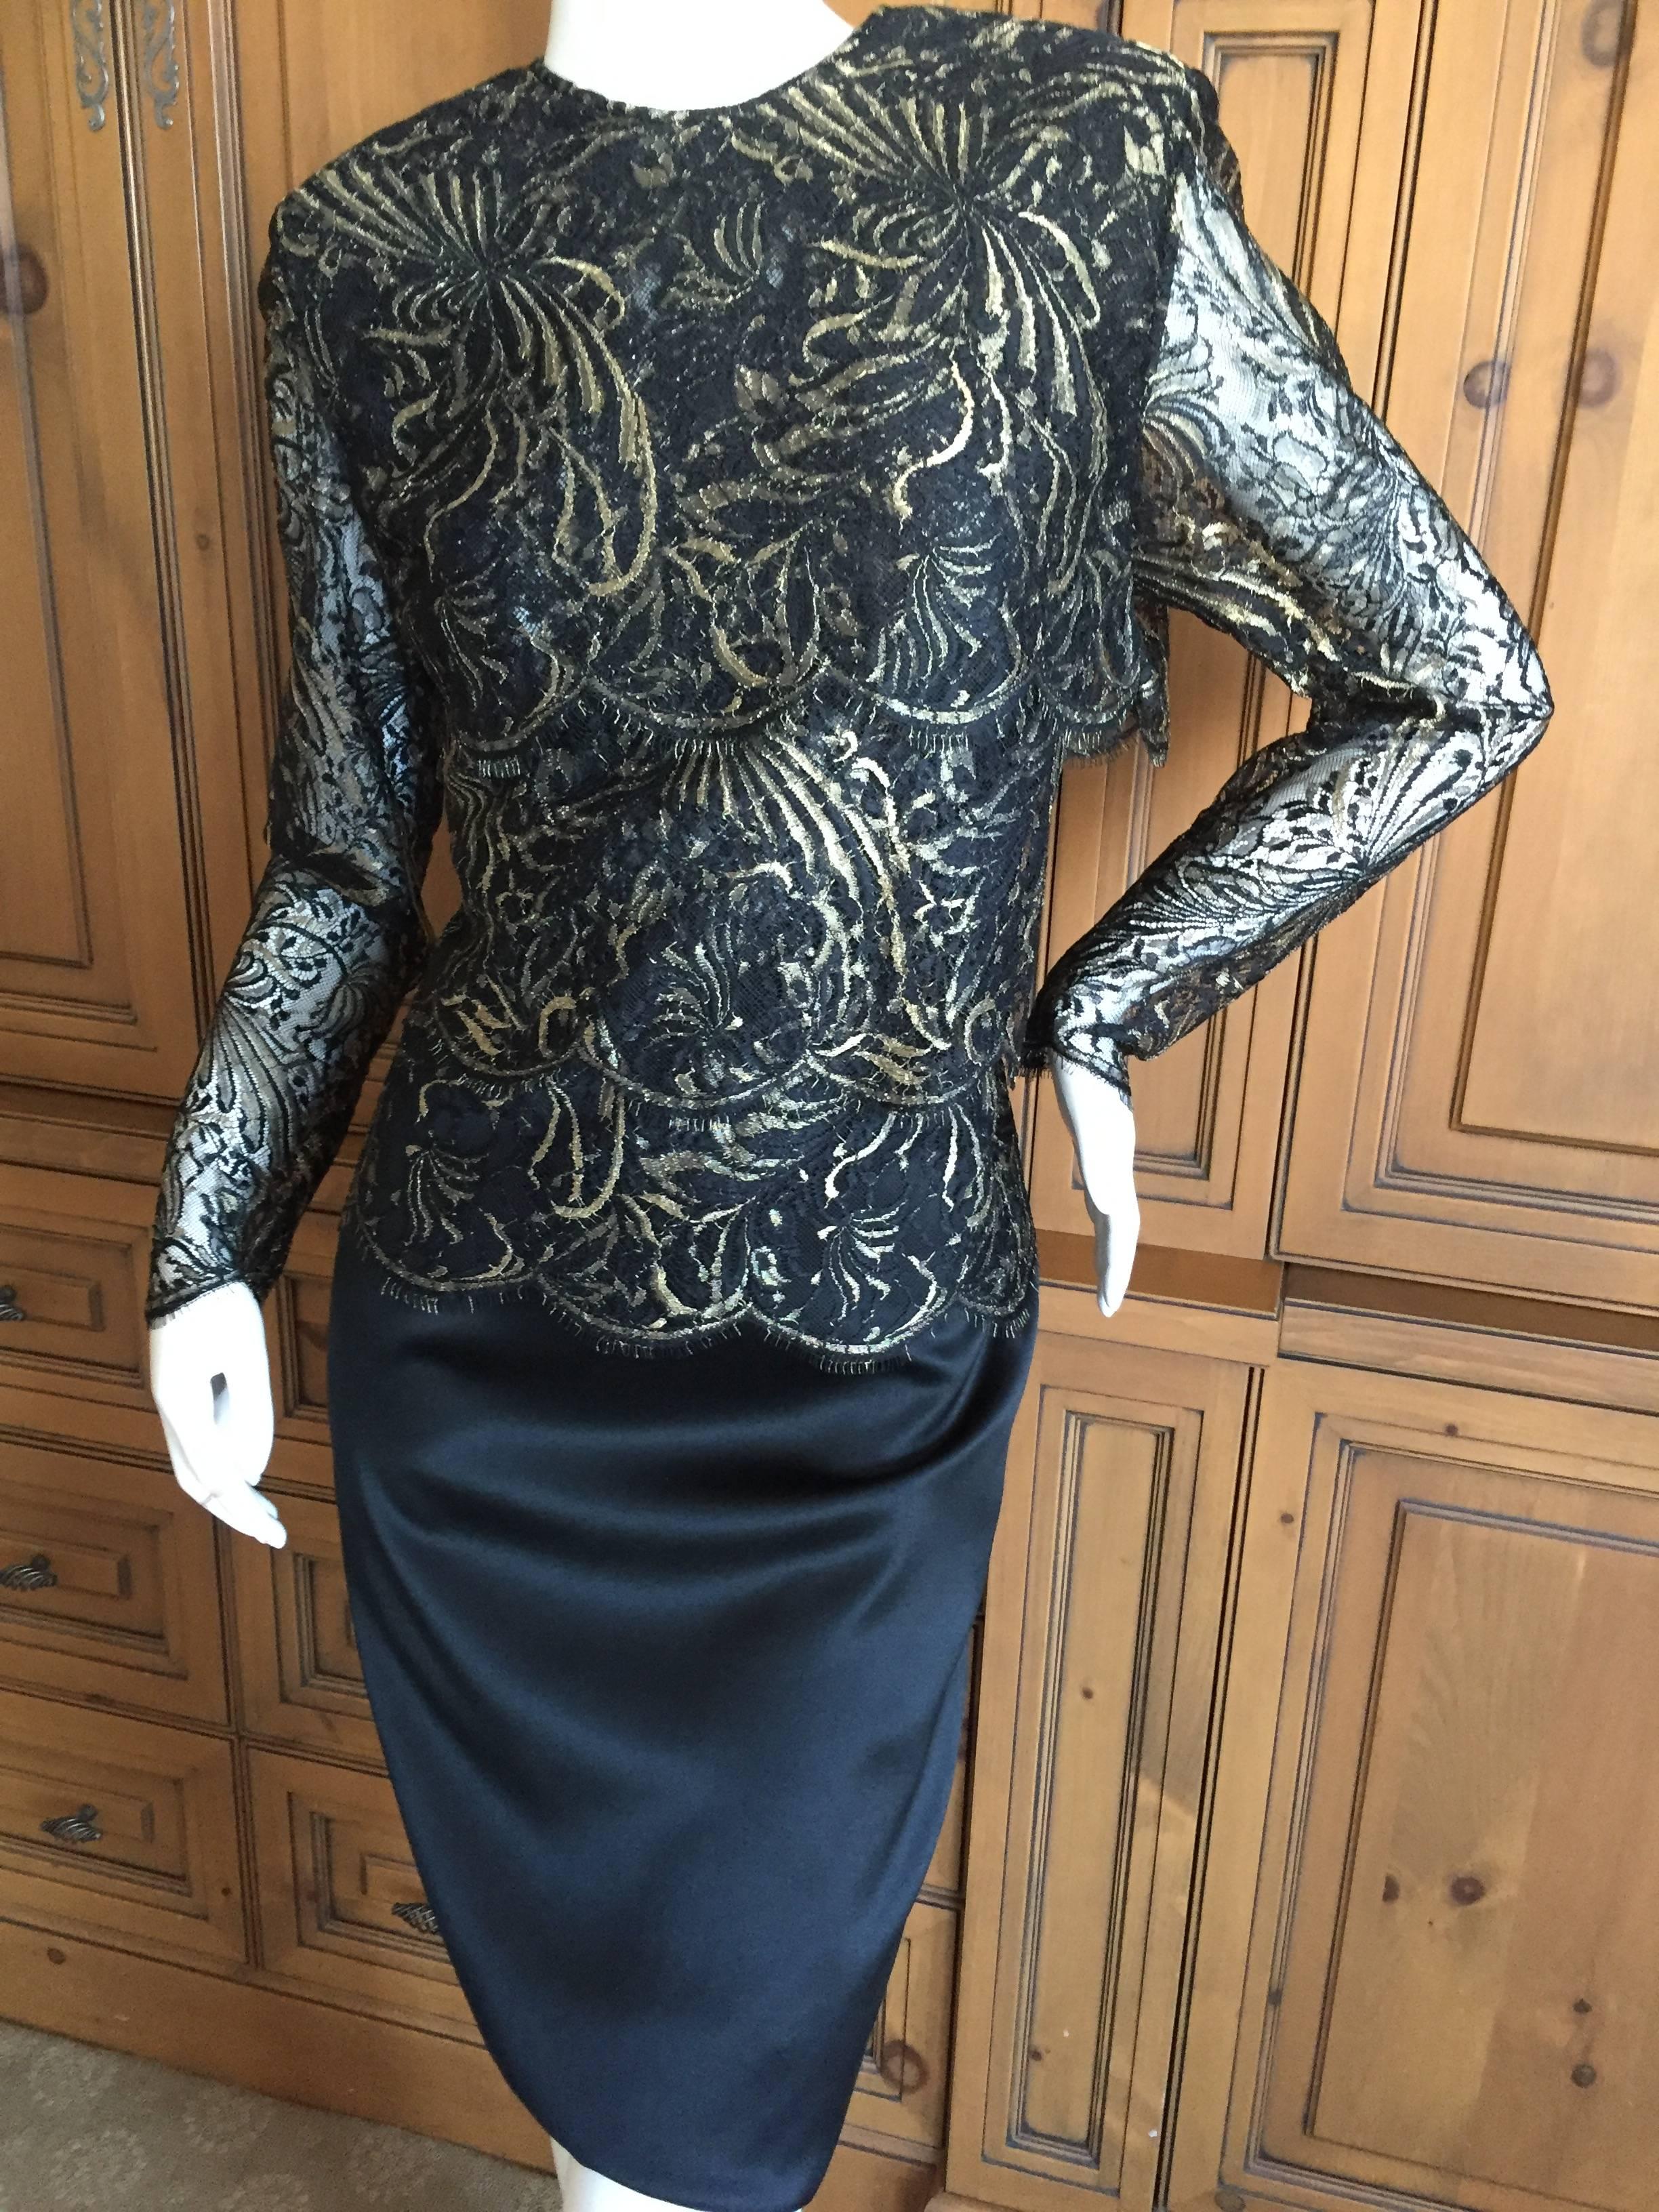 Galanos Tiered Lace Dress with Gold Accents For Sale 5